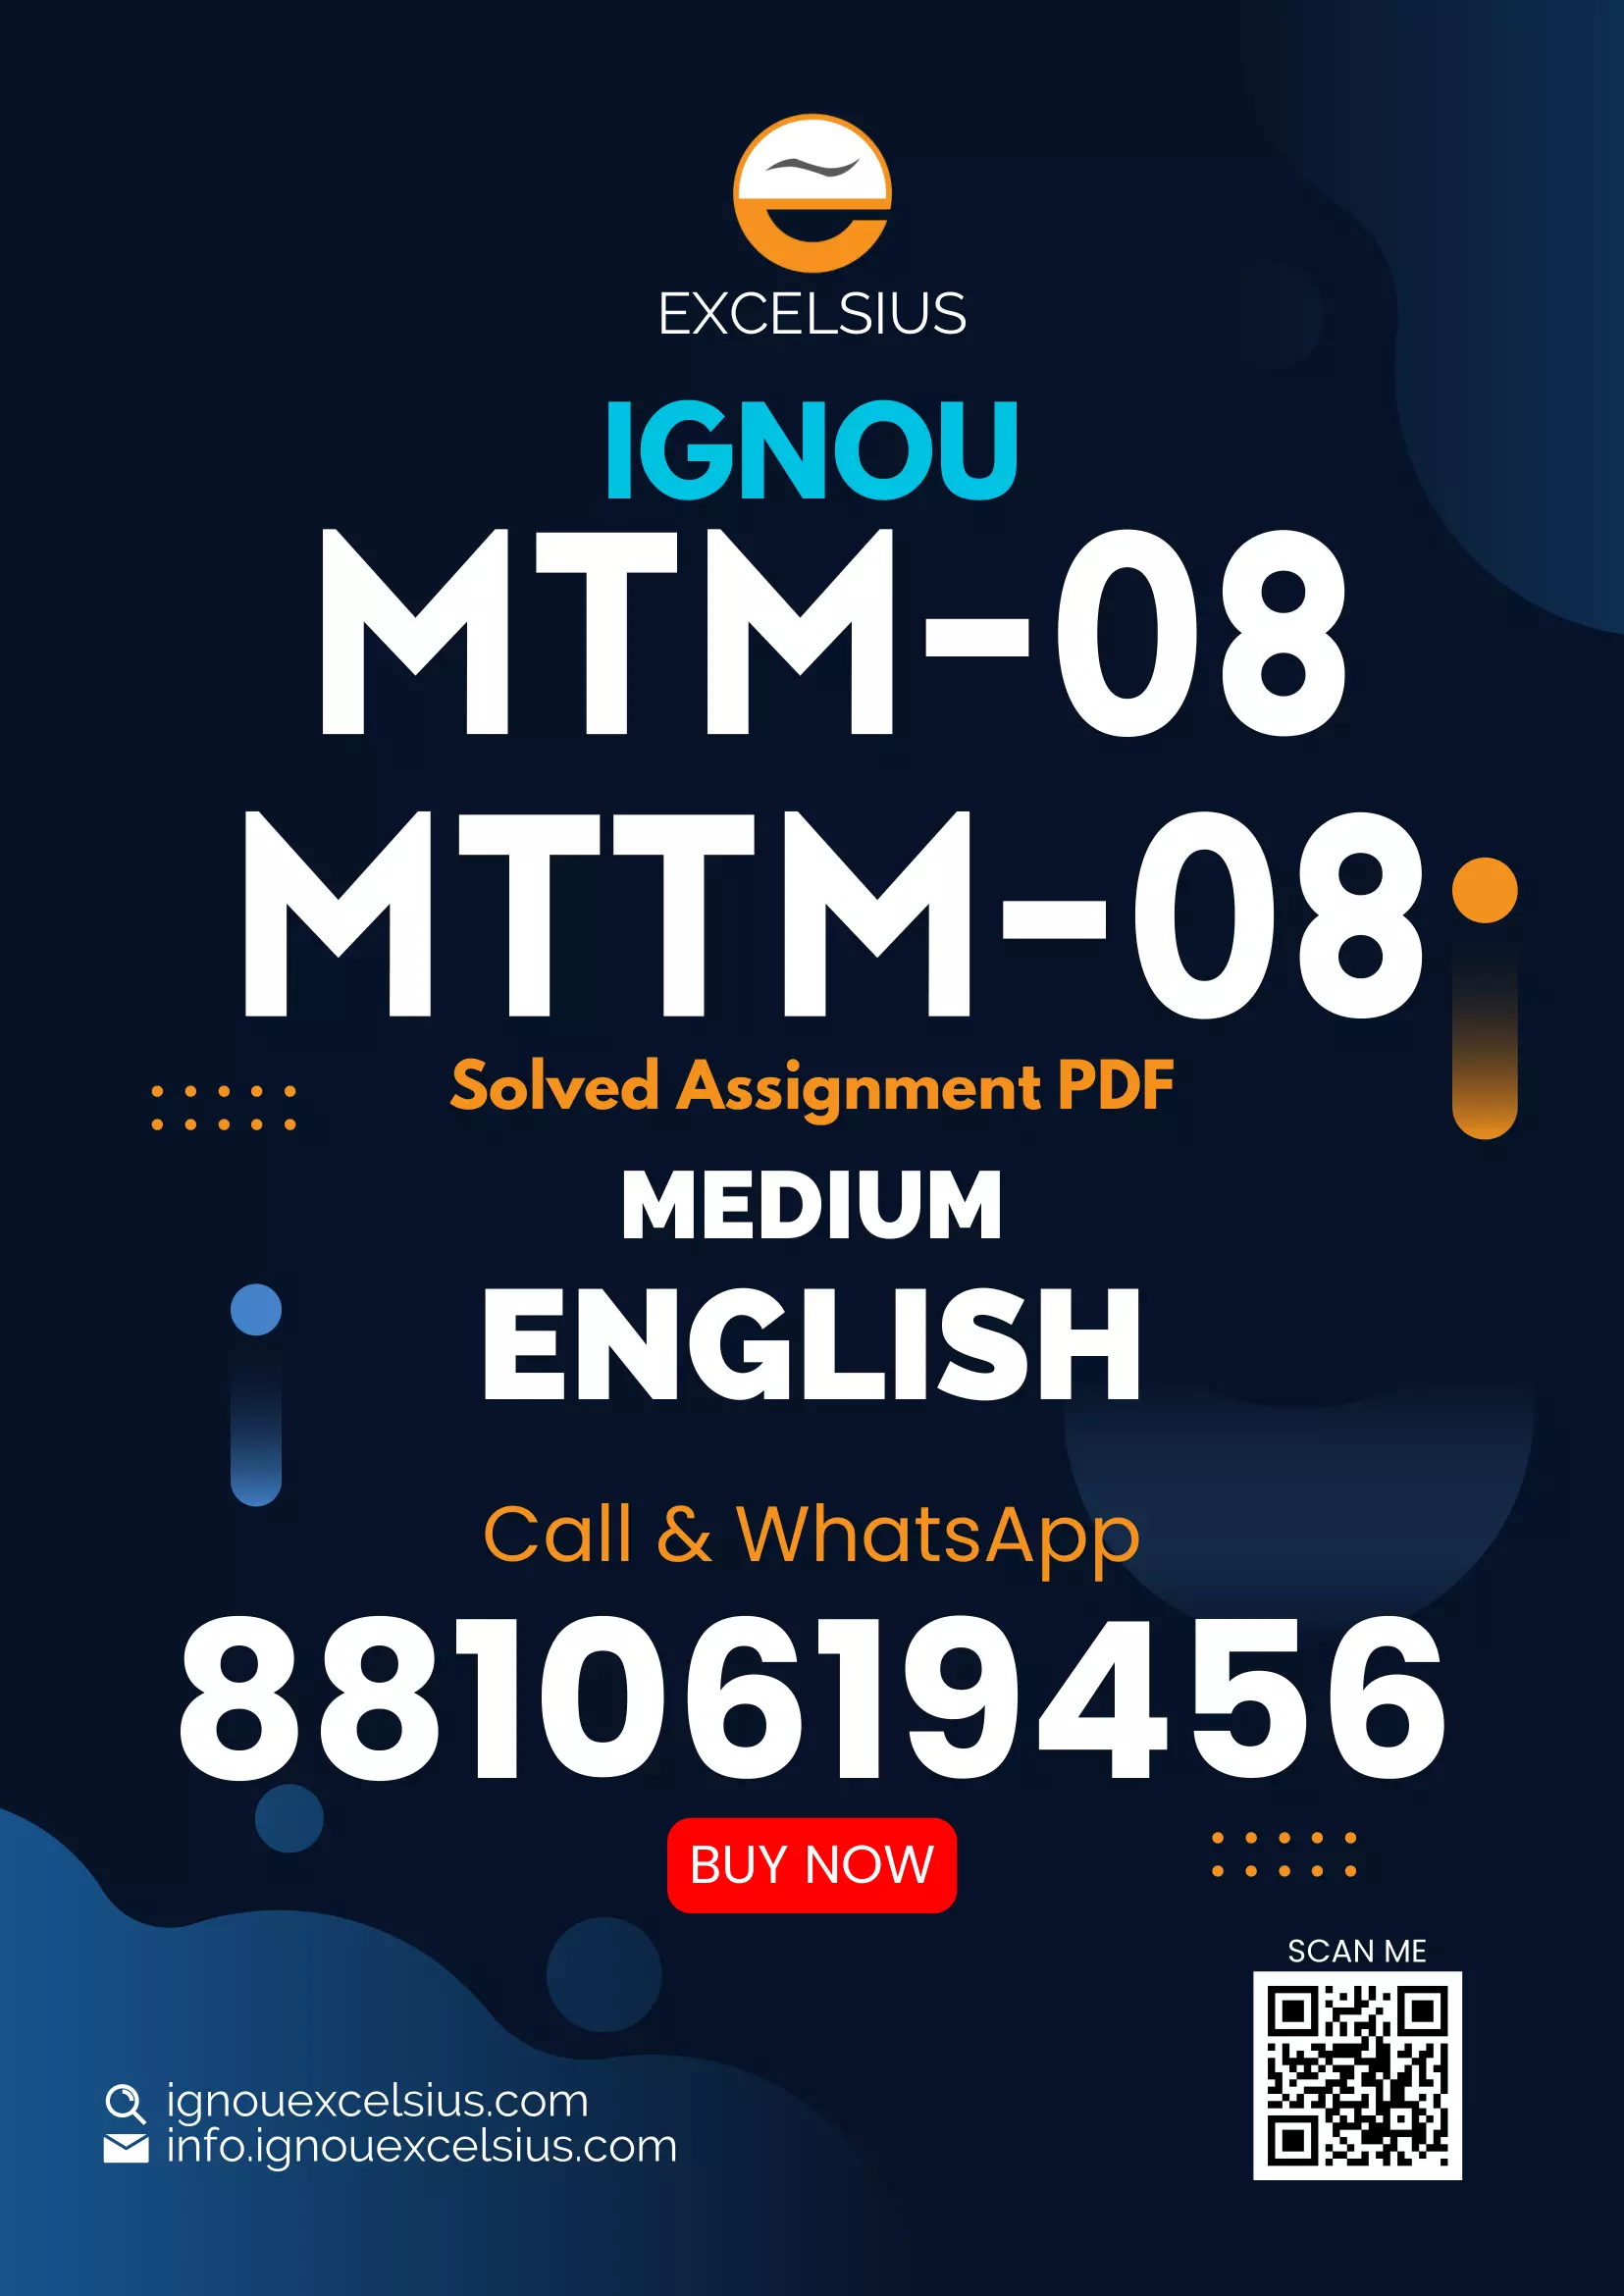 IGNOU MTM-08/MTTM-08 - Managing Small Scale Enterprises in Tourism, Latest Solved Assignment-January 2023 - July 2023